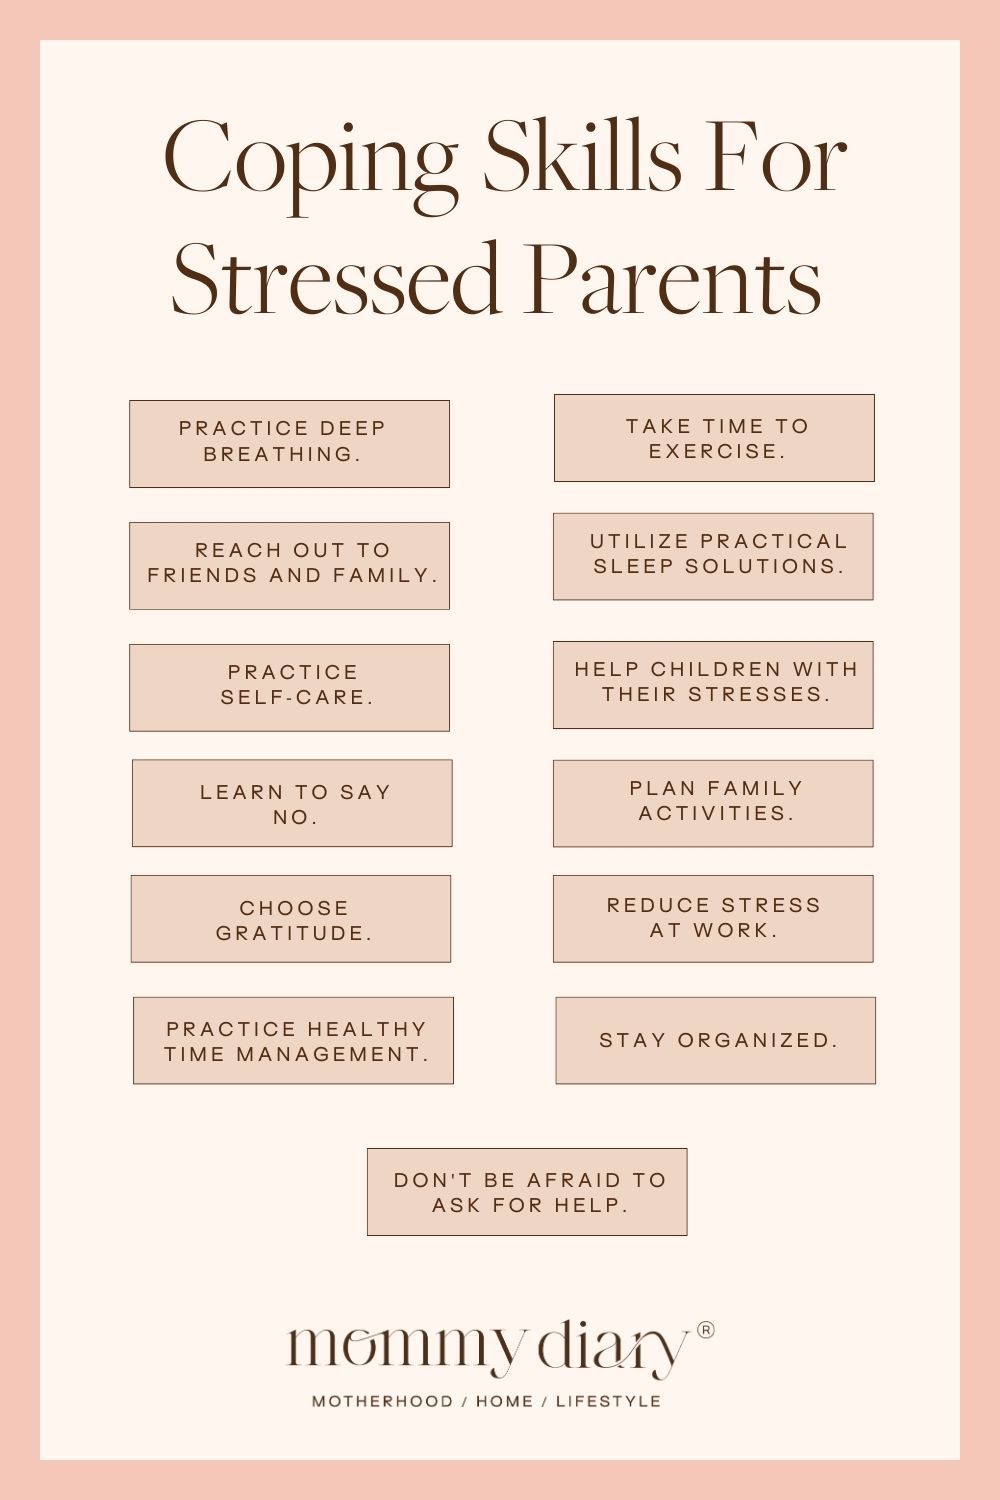 Coping Skills for Stressed Parents